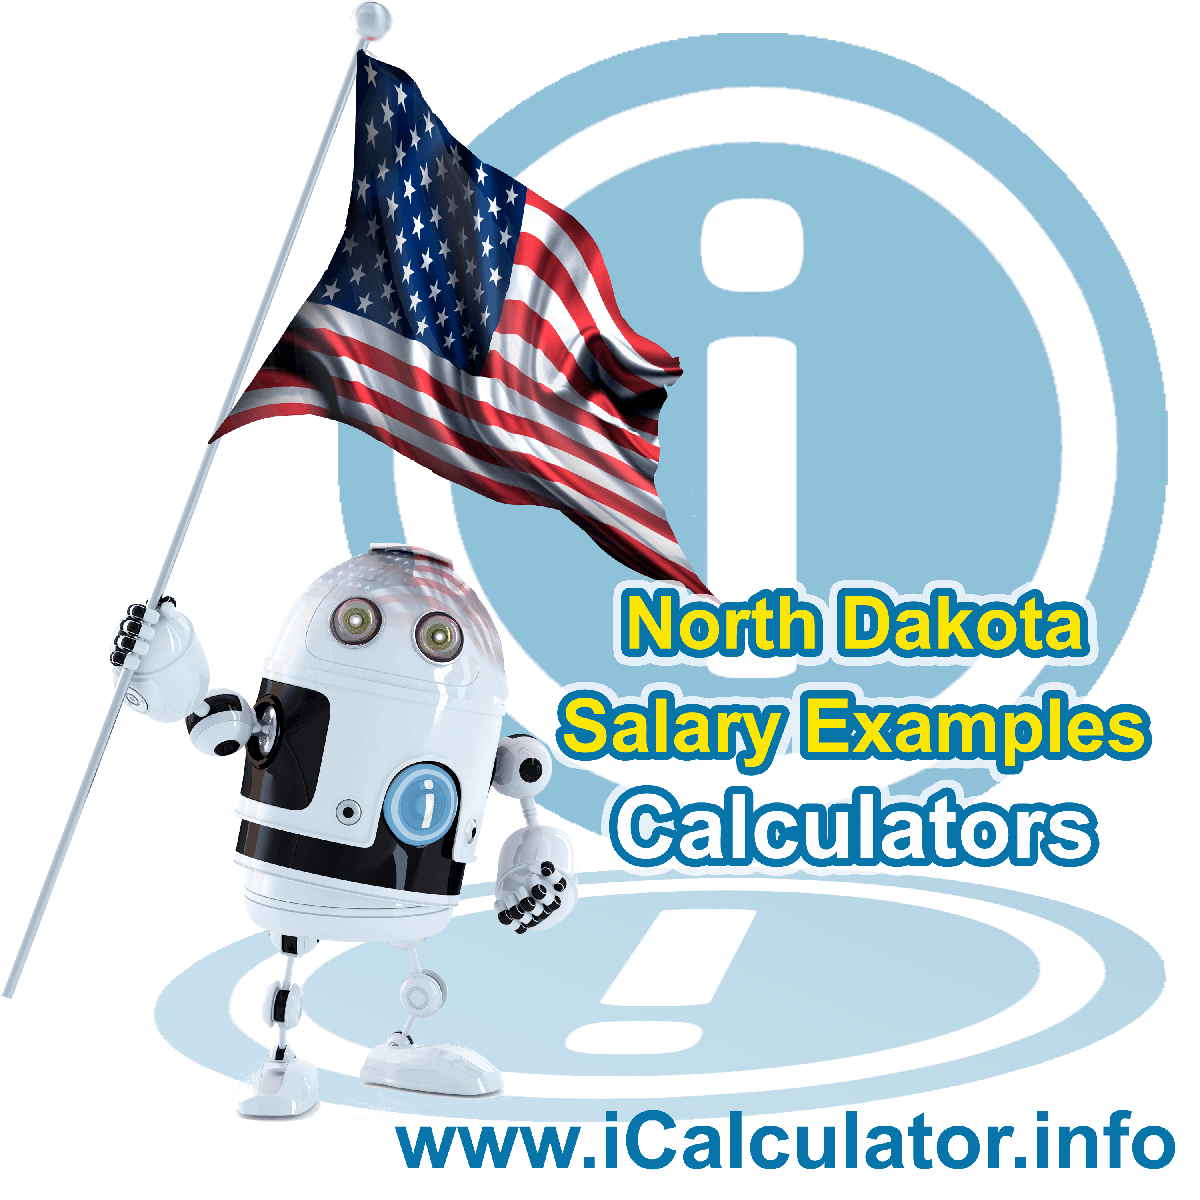 North Dakota Salary Example for $ 100,000.00 in 2023 | iCalculator™ | $ 100,000.00 salary example for employee and employer paying North Dakota State tincome taxes. Detailed salary after tax calculation including North Dakota State Tax, Federal State Tax, Medicare Deductions, Social Security, Capital Gains and other income tax and salary deductions complete with supporting North Dakota state tax tables 